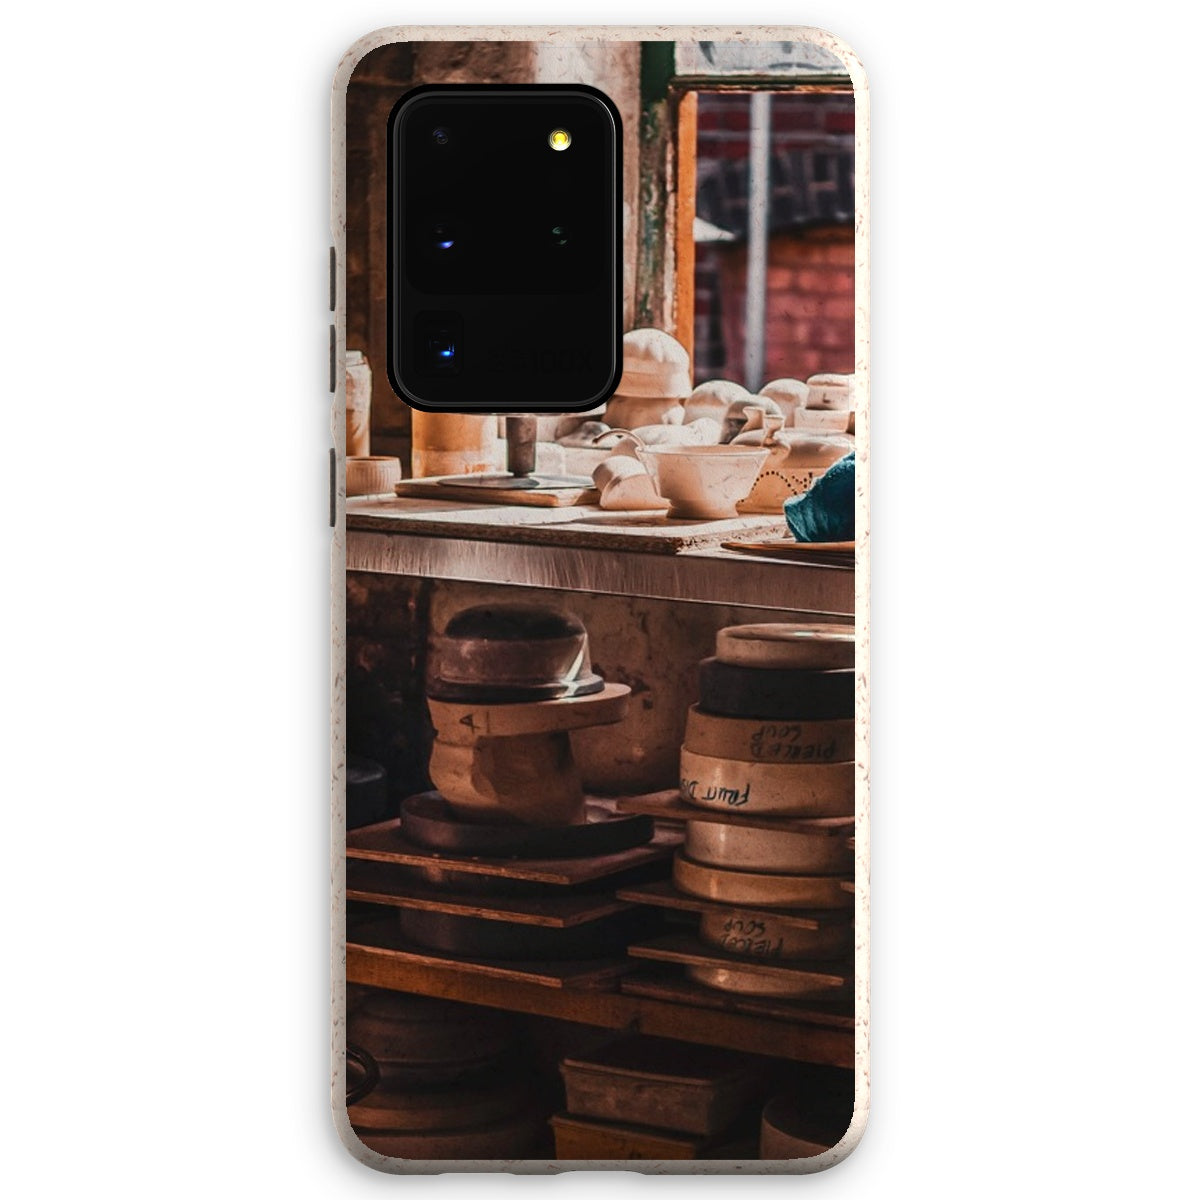 The Potter's Craft Eco Phone Case